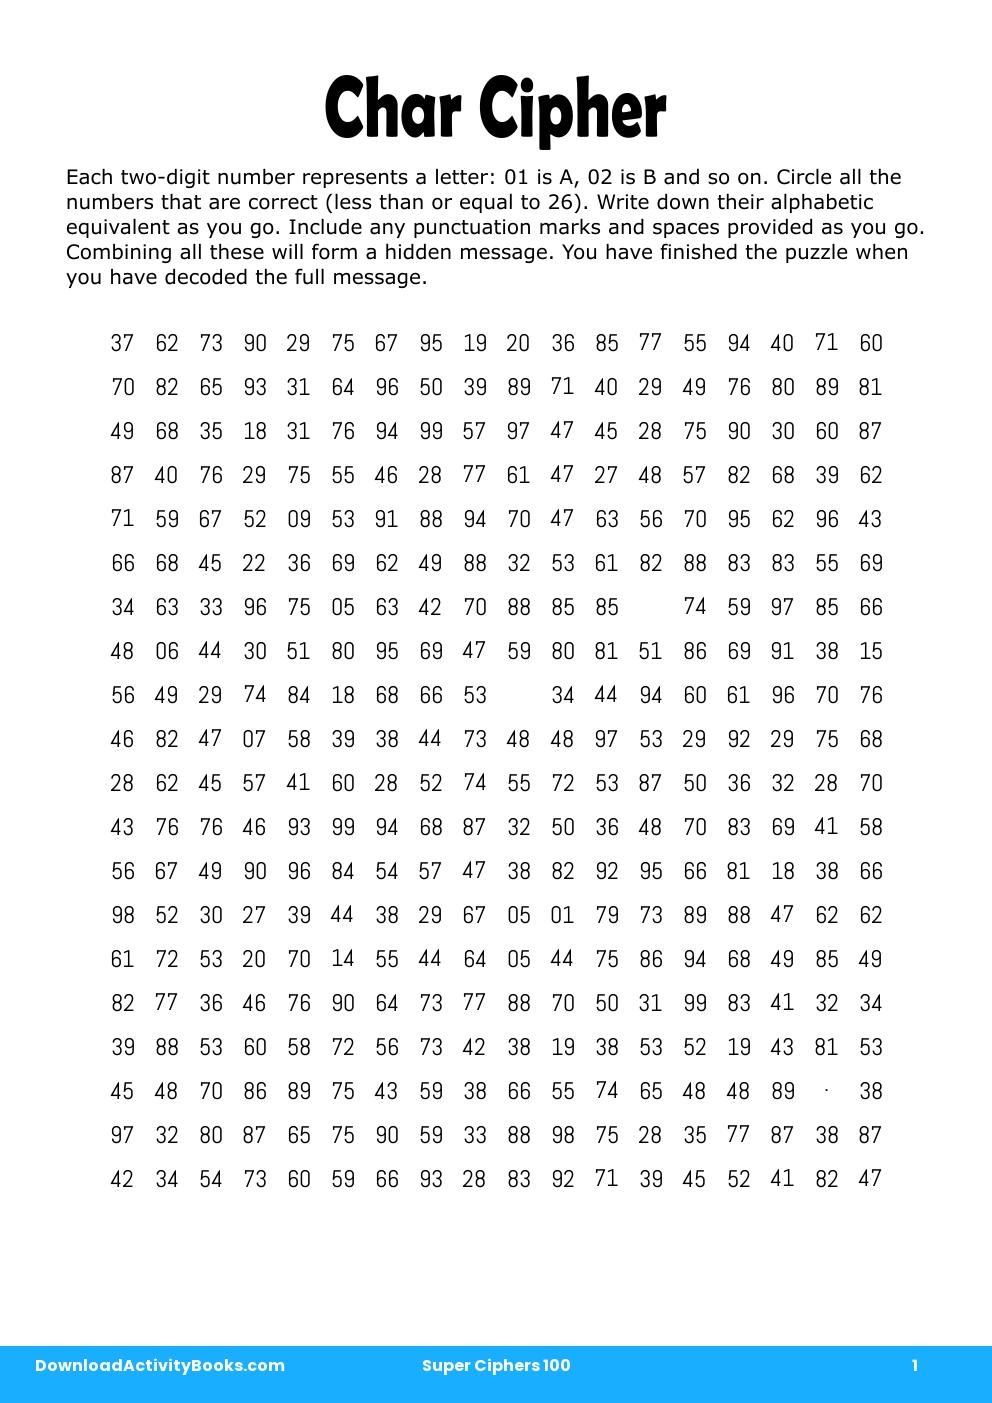 Char Cipher in Super Ciphers 100